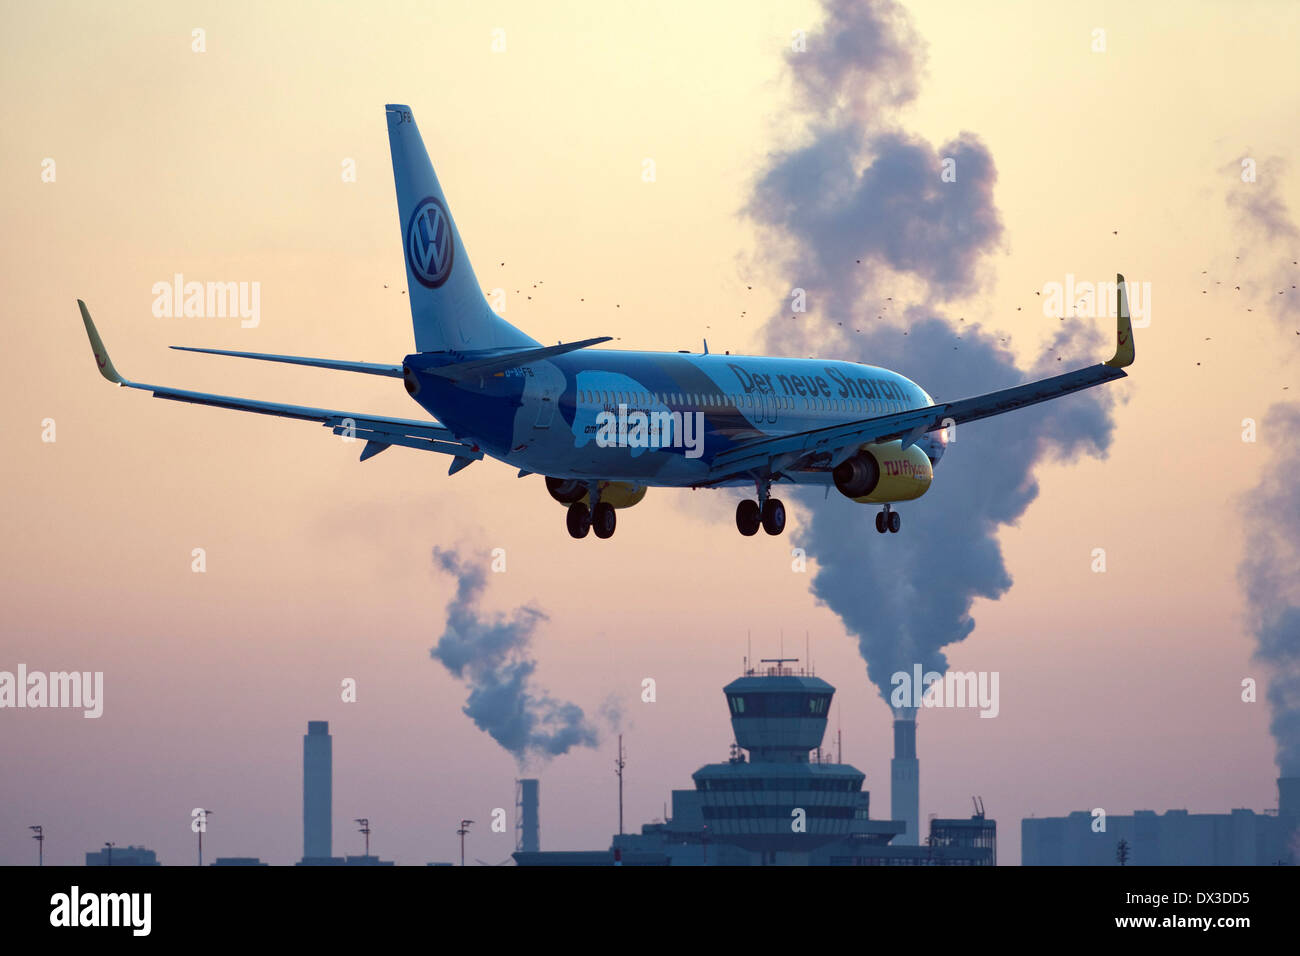 Aircraft with VW advertising Stock Photo - Alamy